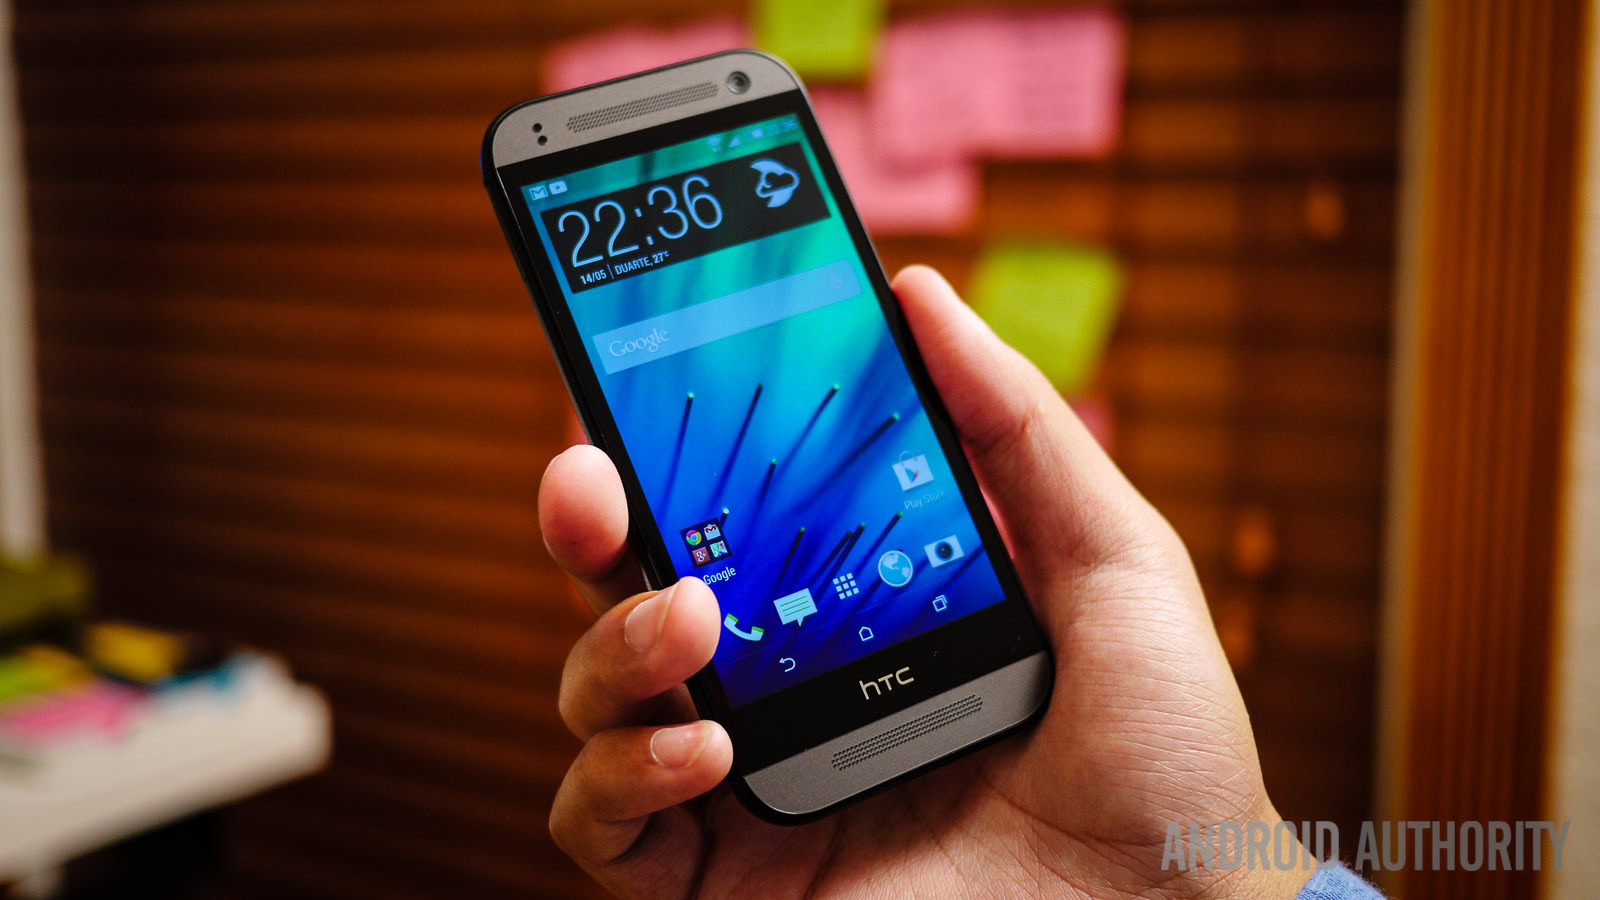 htc one mini 2 first look (6 of 22)